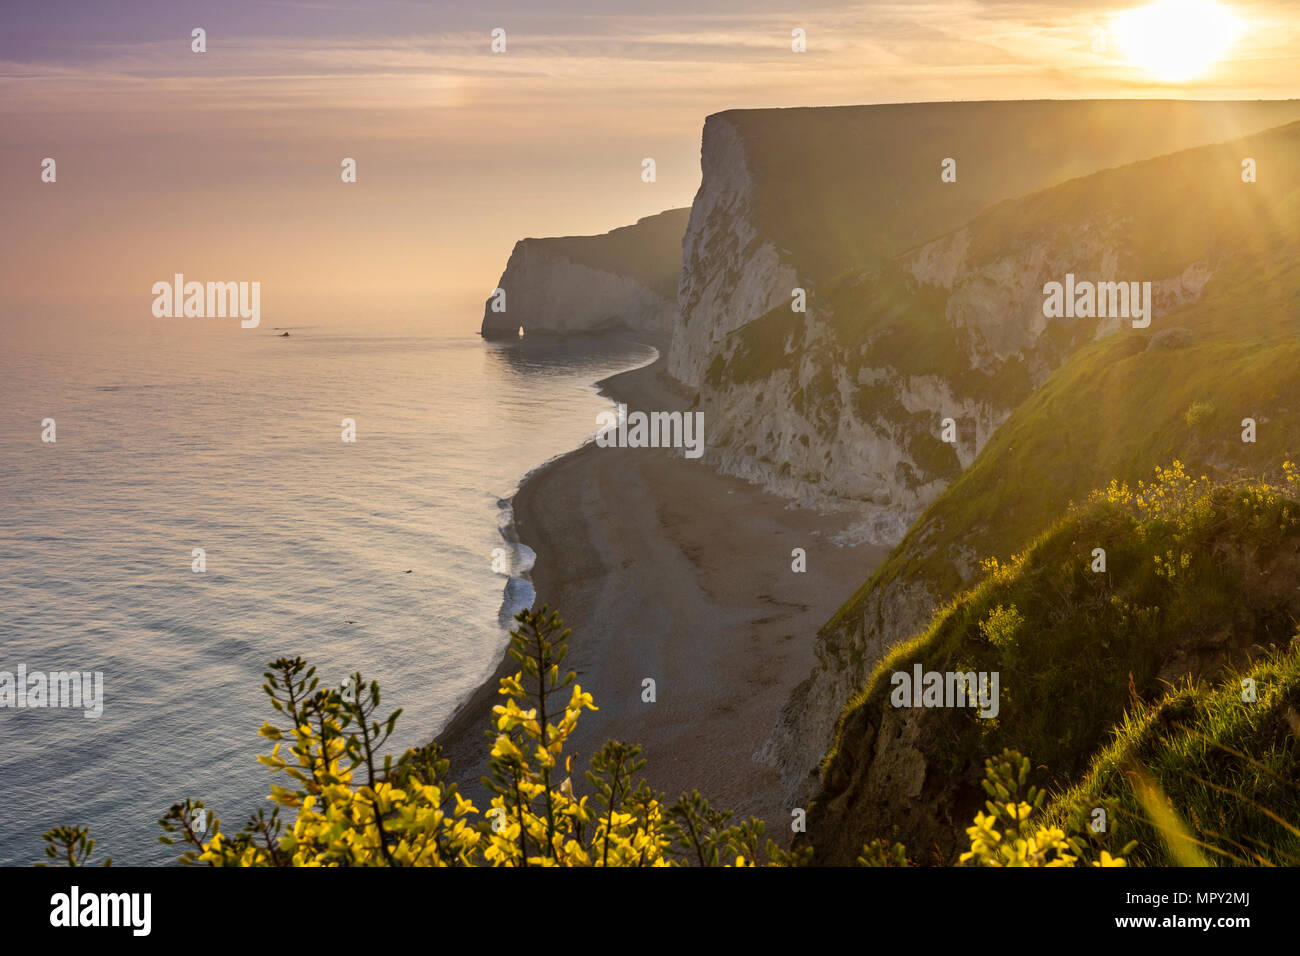 Golden sunset over the Jurassic Coast with view to the white cliffs of Bats Head, UNESCO Natural World Heritage Site, Dorset, England, UK Stock Photo